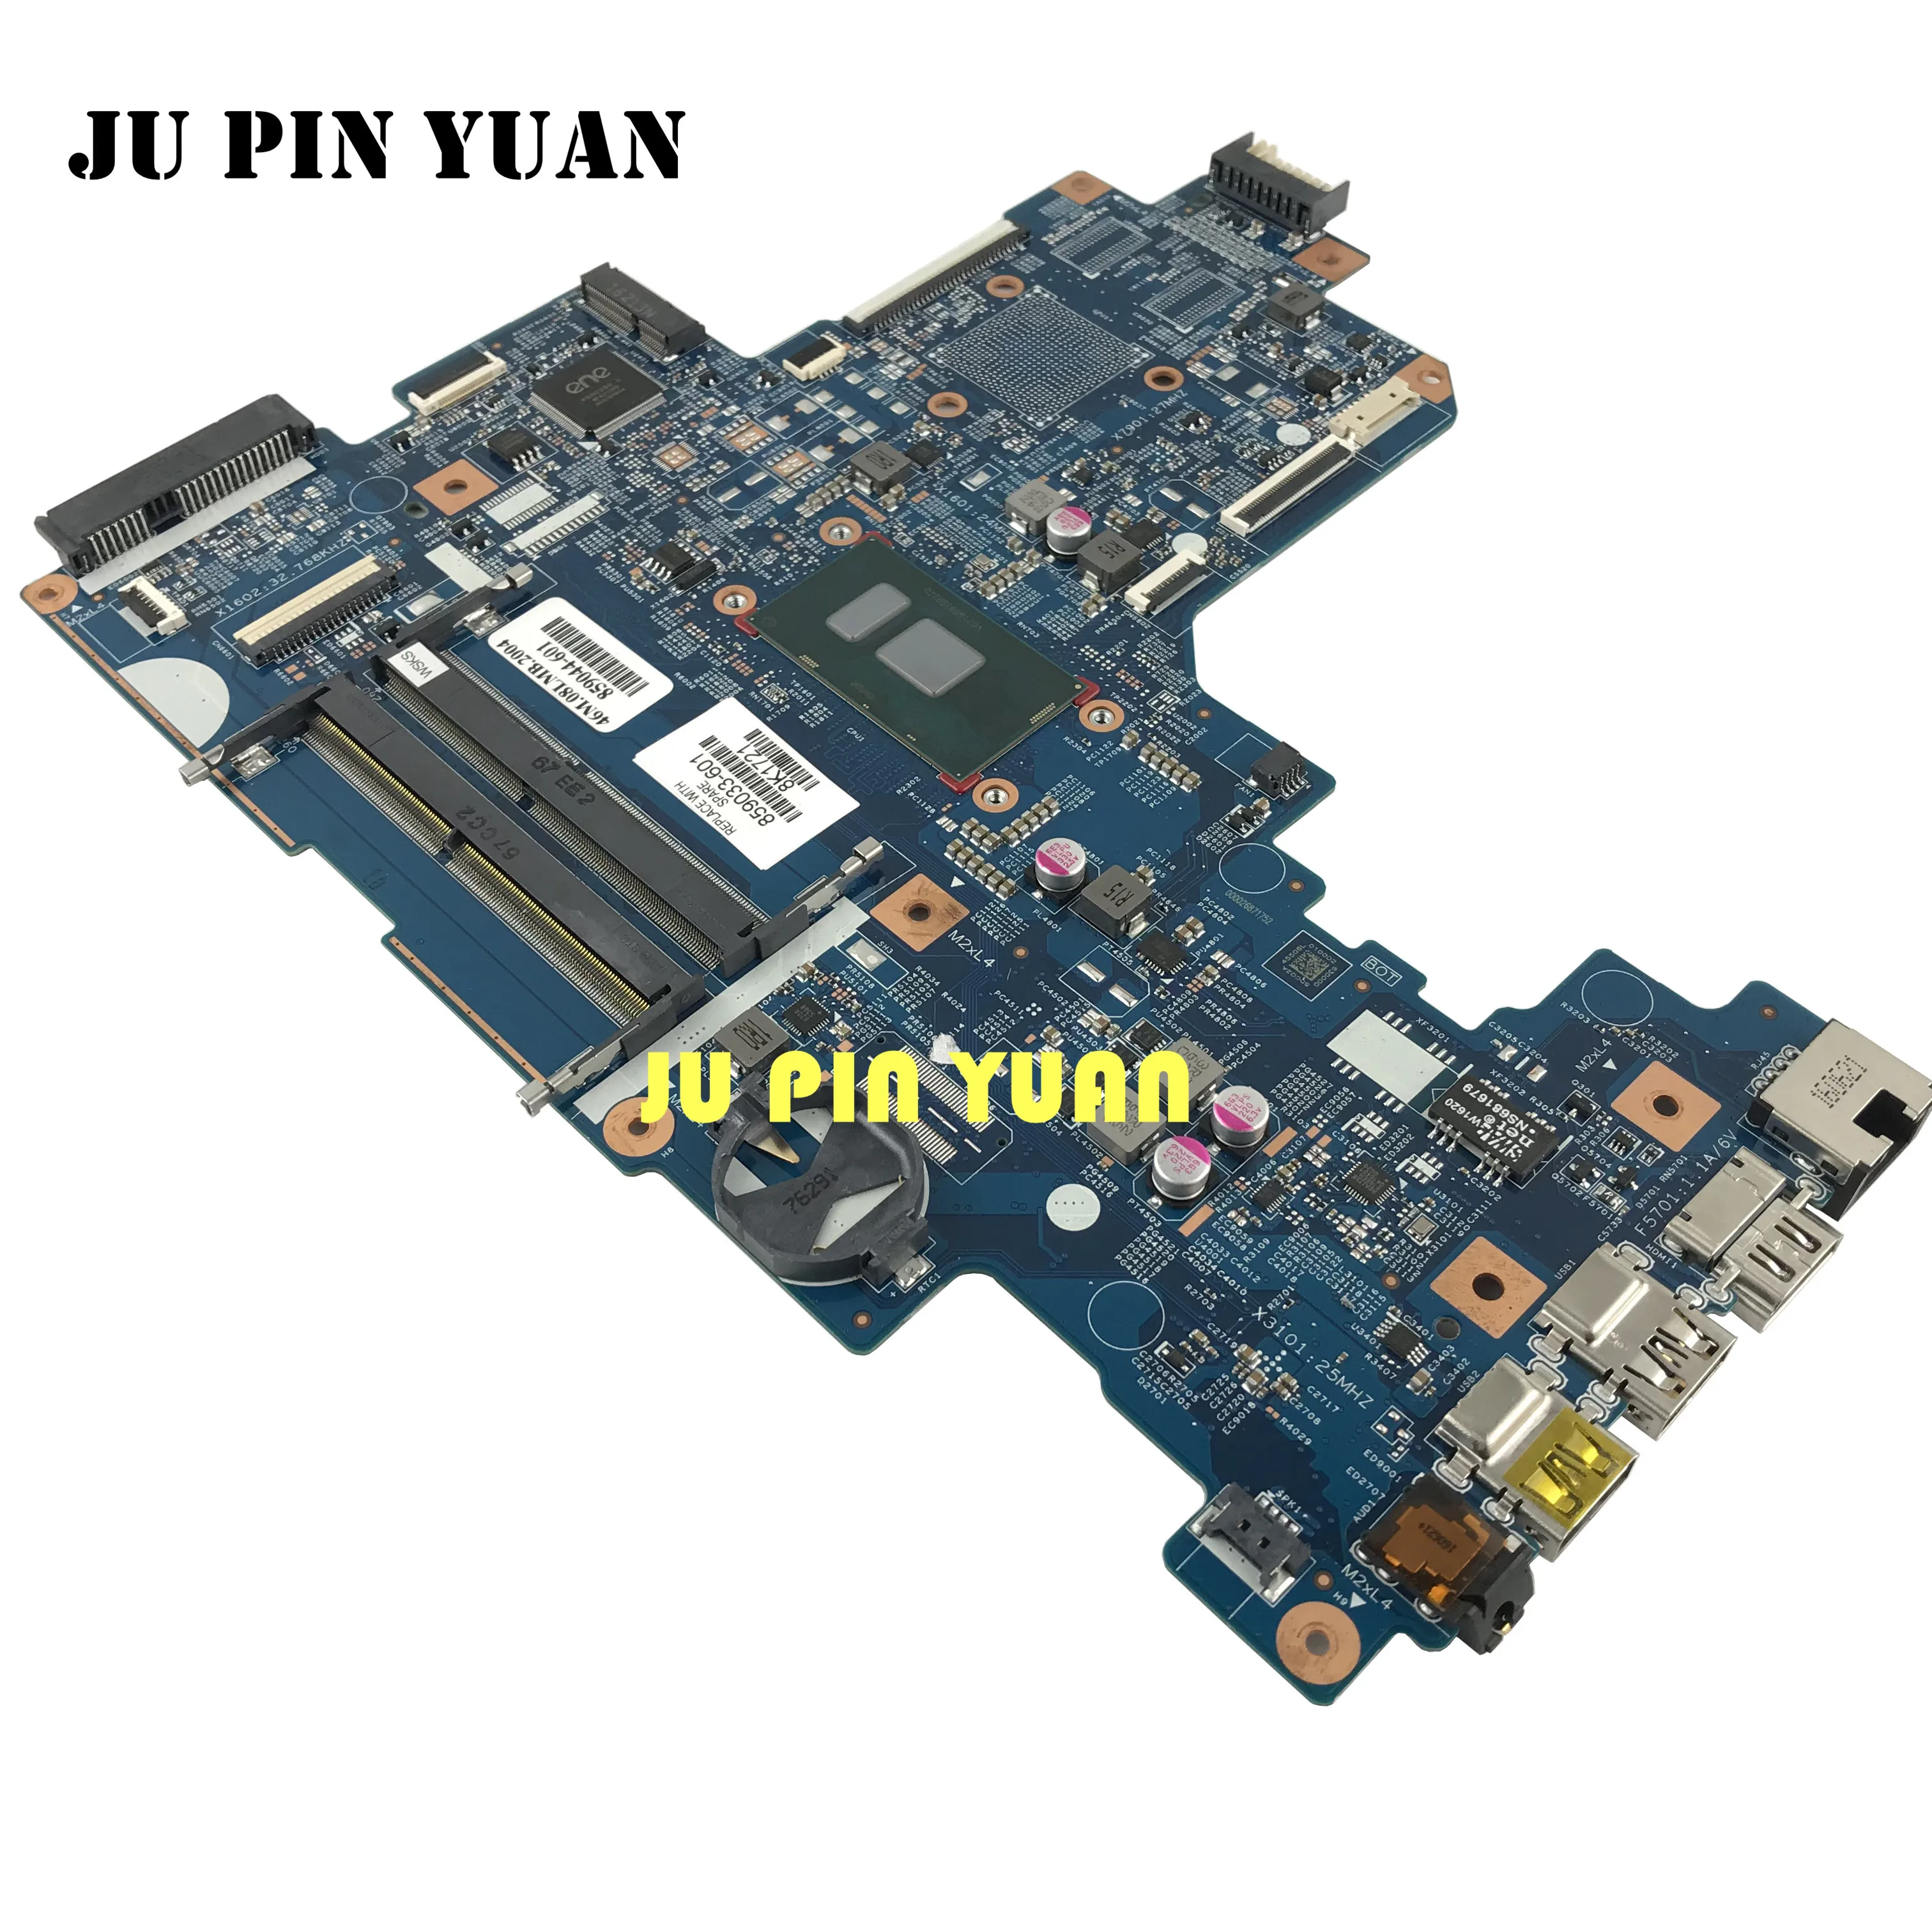 

For HP Notebook 17-X Series Motherboard 859033-601 859033-501 859033-001 15289-2 448.08E01.0021 with i5-7200U CPU Fully Tested